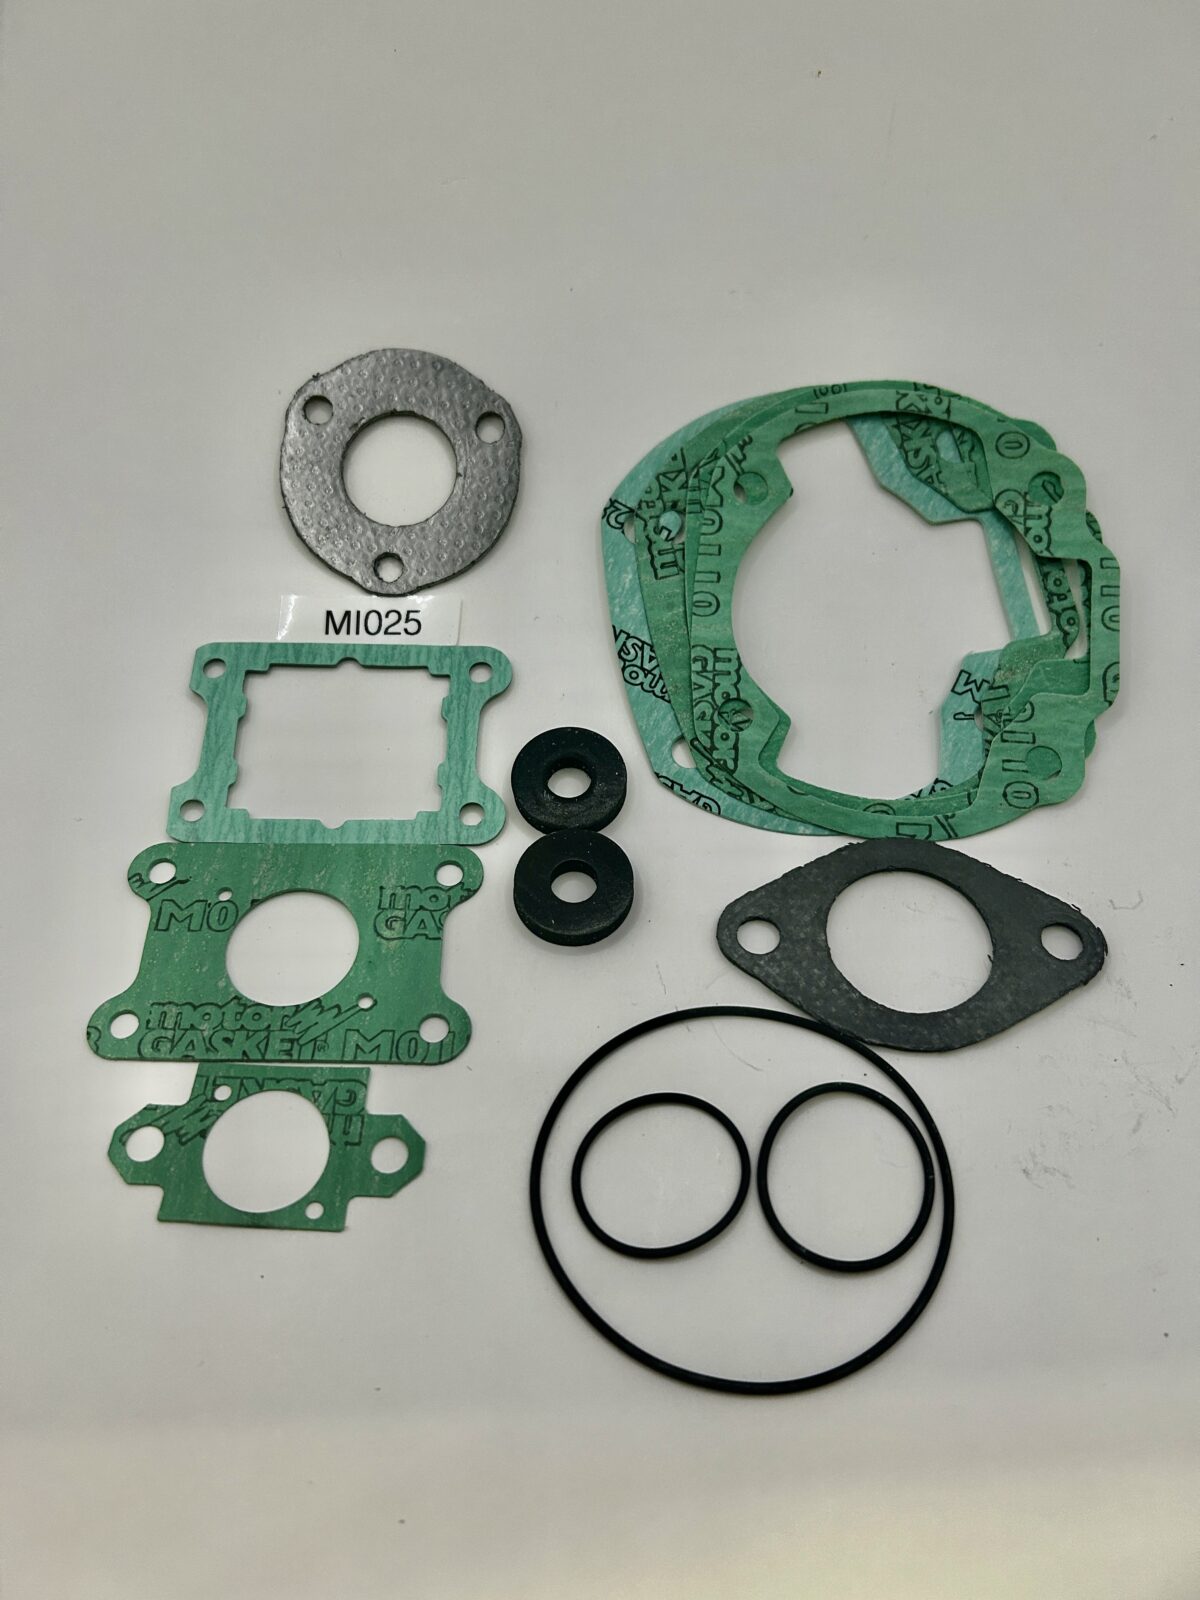 MI025 MosterEFI Complete Series of Gaskets and O-ring